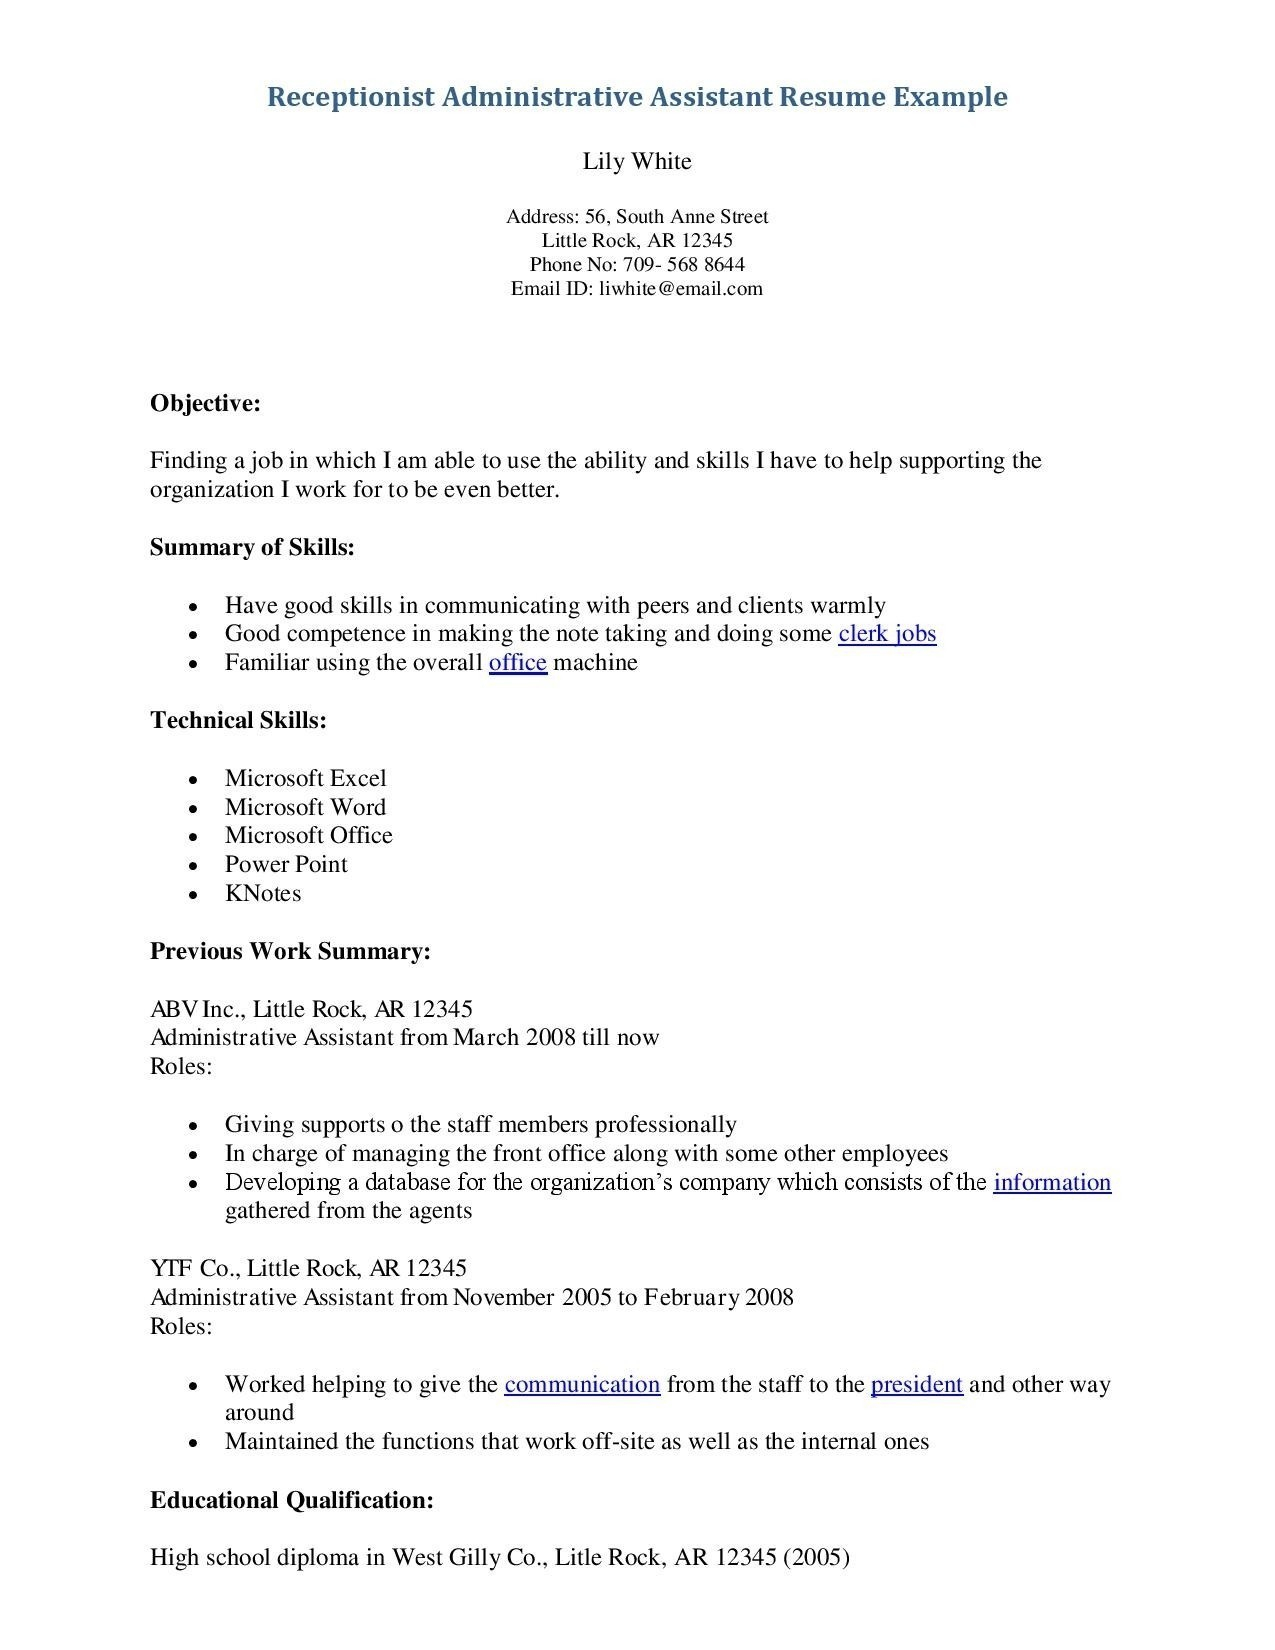 Resume Objective Examples  Receptionist Resume Sample Pdf New Resume Objective Examples For